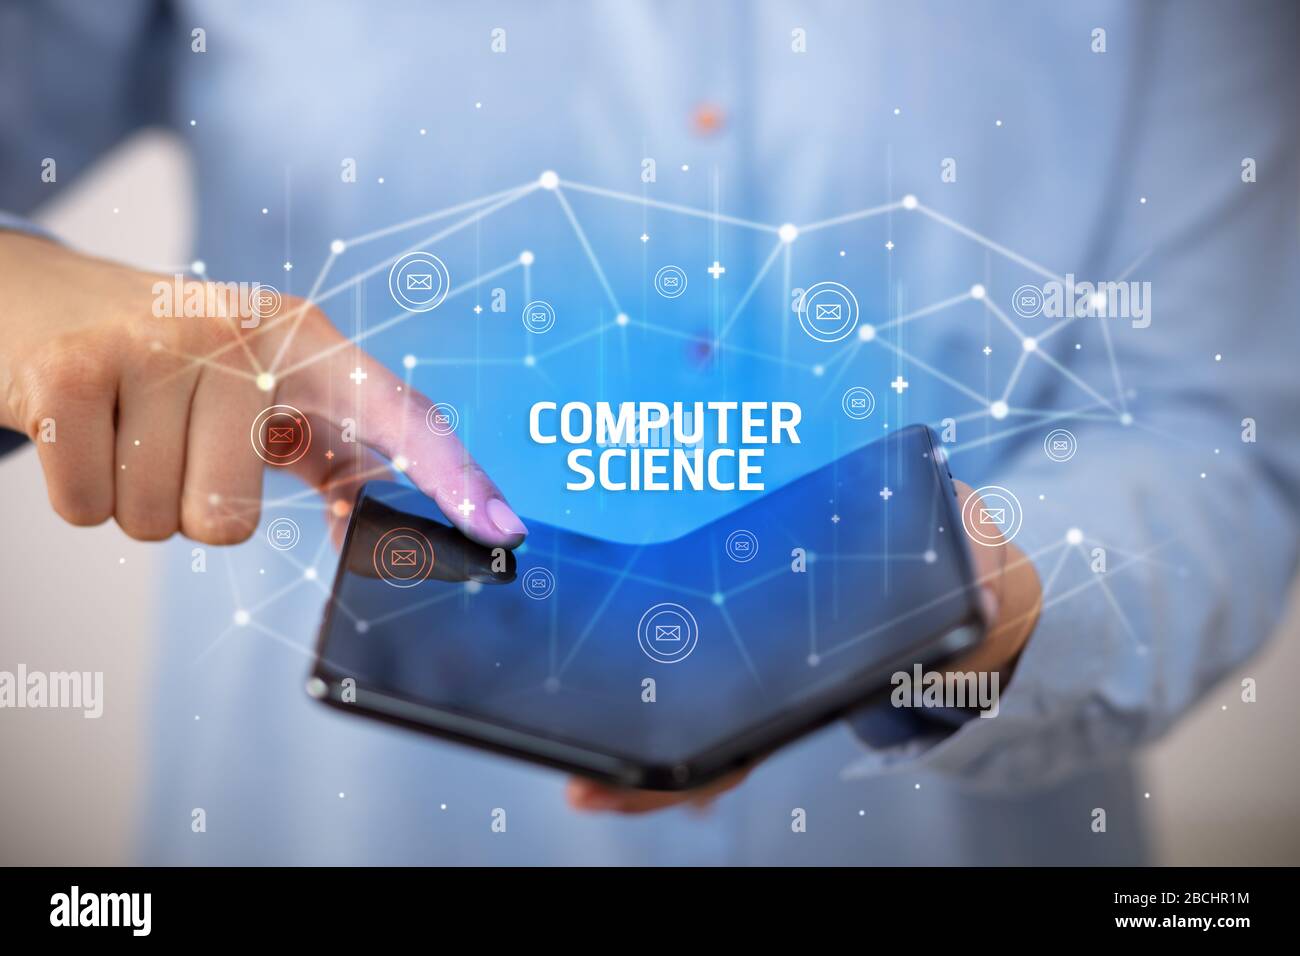 Businessman holding a foldable smartphone with COMPUTER SCIENCE inscription, new technology concept Stock Photo